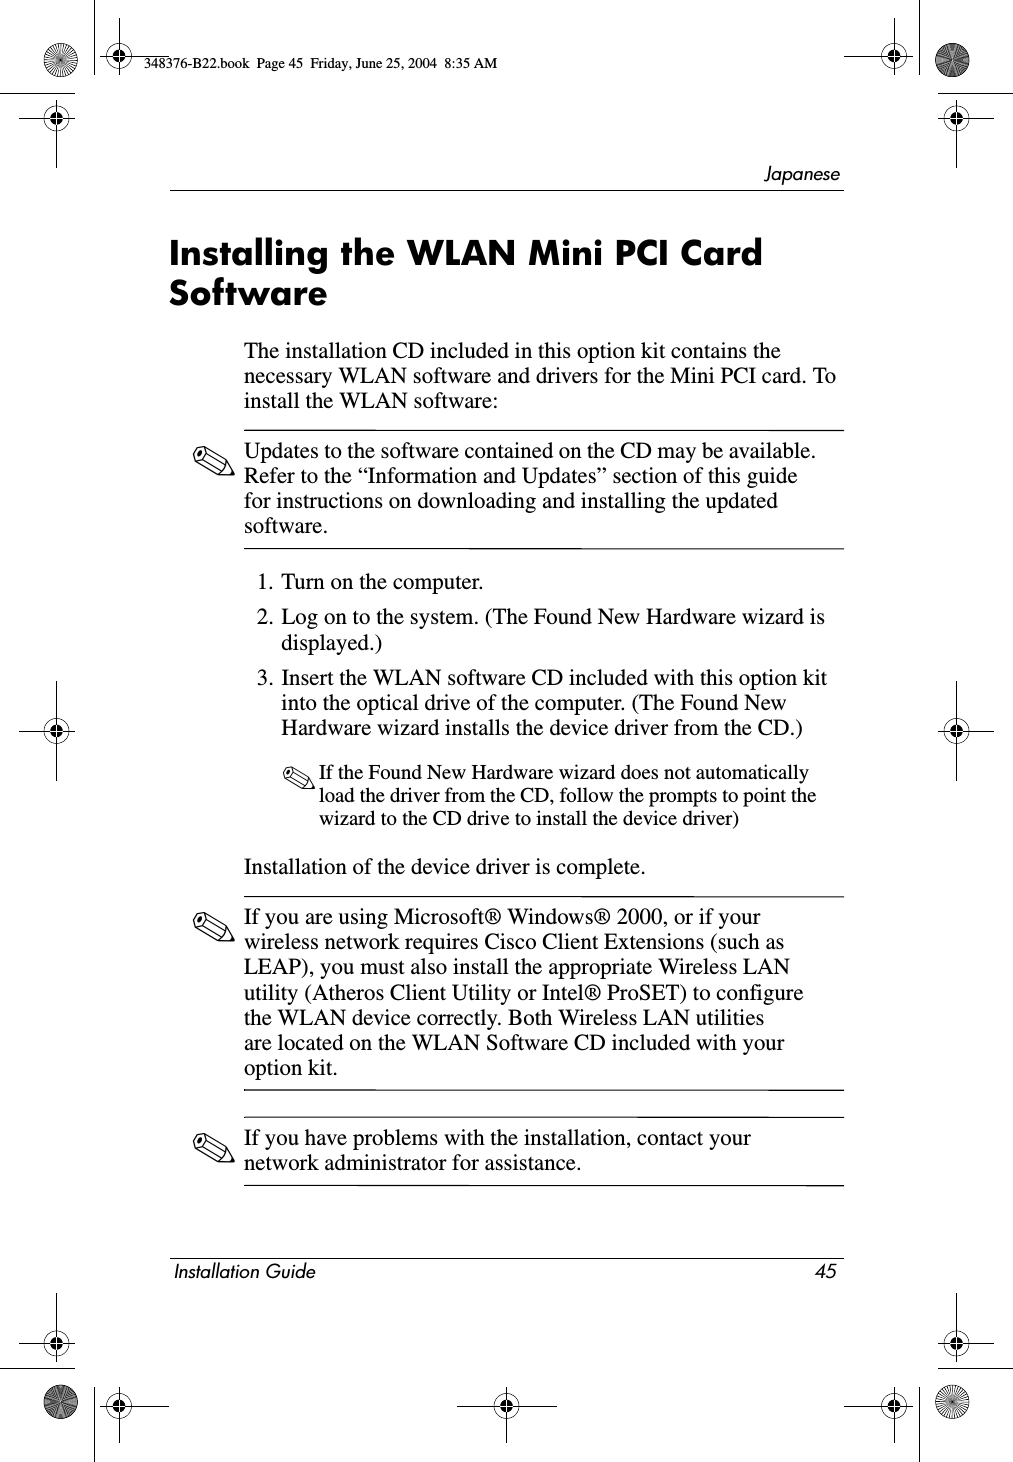 JapaneseInstallation Guide 45Installing the WLAN Mini PCI Card SoftwareThe installation CD included in this option kit contains the necessary WLAN software and drivers for the Mini PCI card. To install the WLAN software: ✎Updates to the software contained on the CD may be available. Refer to the “Information and Updates” section of this guide for instructions on downloading and installing the updated software.1. Turn on the computer.2. Log on to the system. (The Found New Hardware wizard is displayed.)3. Insert the WLAN software CD included with this option kit into the optical drive of the computer. (The Found New Hardware wizard installs the device driver from the CD.)✎If the Found New Hardware wizard does not automatically load the driver from the CD, follow the prompts to point the wizard to the CD drive to install the device driver)Installation of the device driver is complete.✎If you are using Microsoft® Windows® 2000, or if your wireless network requires Cisco Client Extensions (such as LEAP), you must also install the appropriate Wireless LAN utility (Atheros Client Utility or Intel® ProSET) to configure the WLAN device correctly. Both Wireless LAN utilities are located on the WLAN Software CD included with your option kit. ✎If you have problems with the installation, contact your network administrator for assistance.348376-B22.book  Page 45  Friday, June 25, 2004  8:35 AM